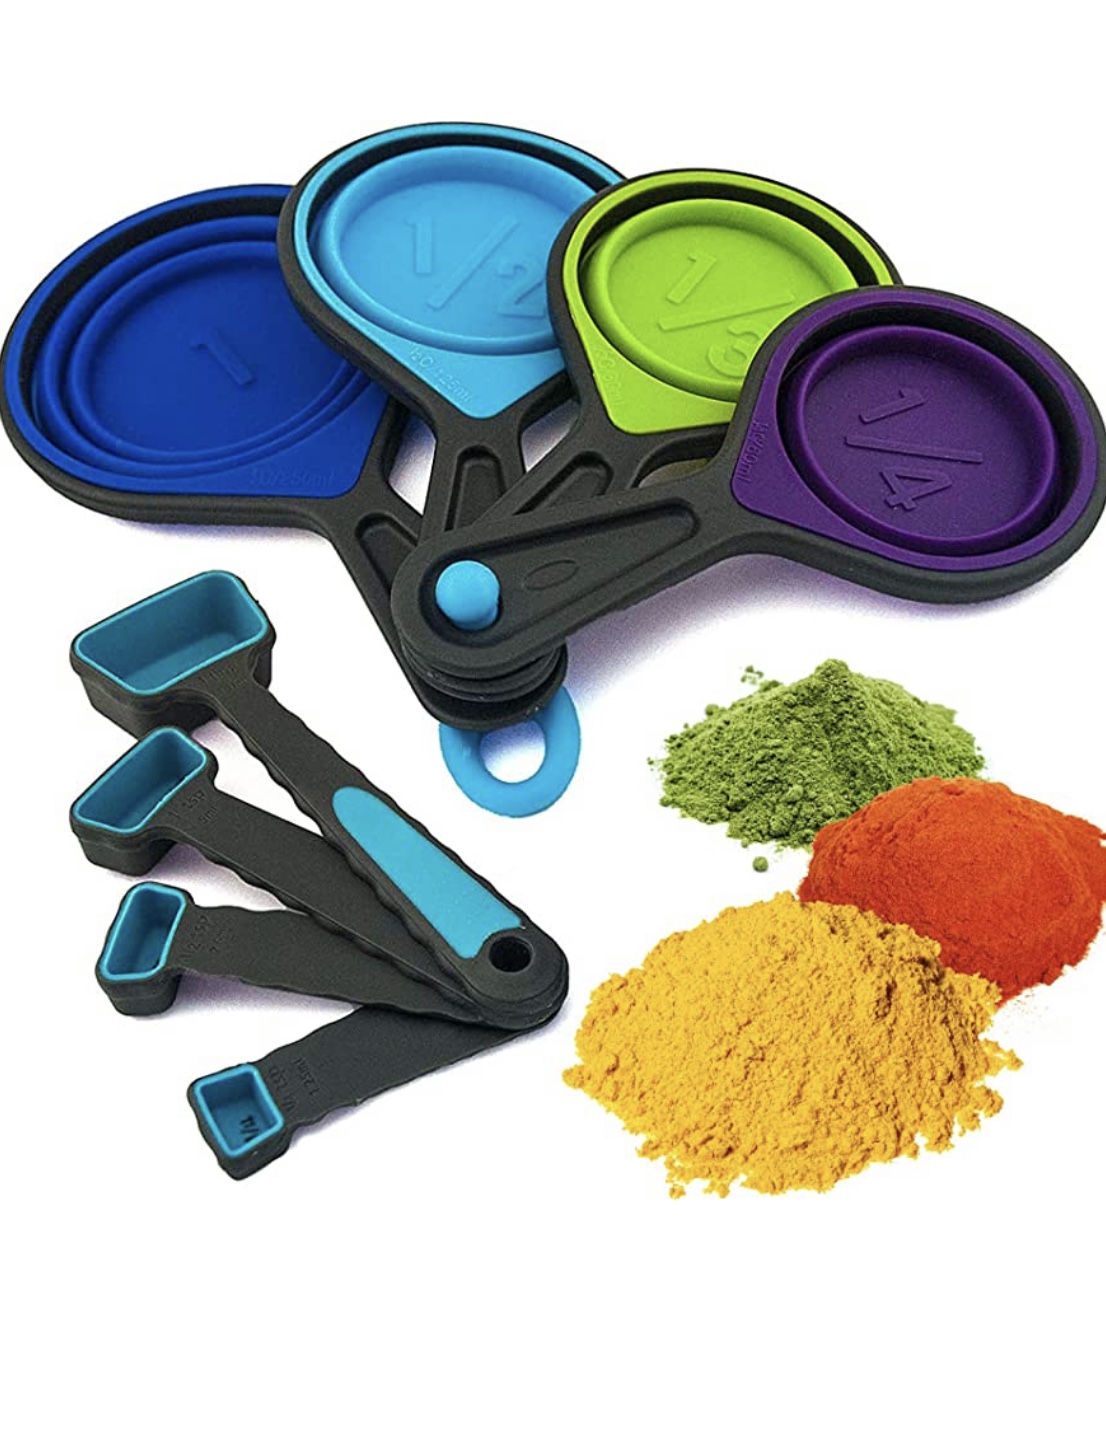 Collapsible Measuring Cups and Measuring Spoons - Portable Food